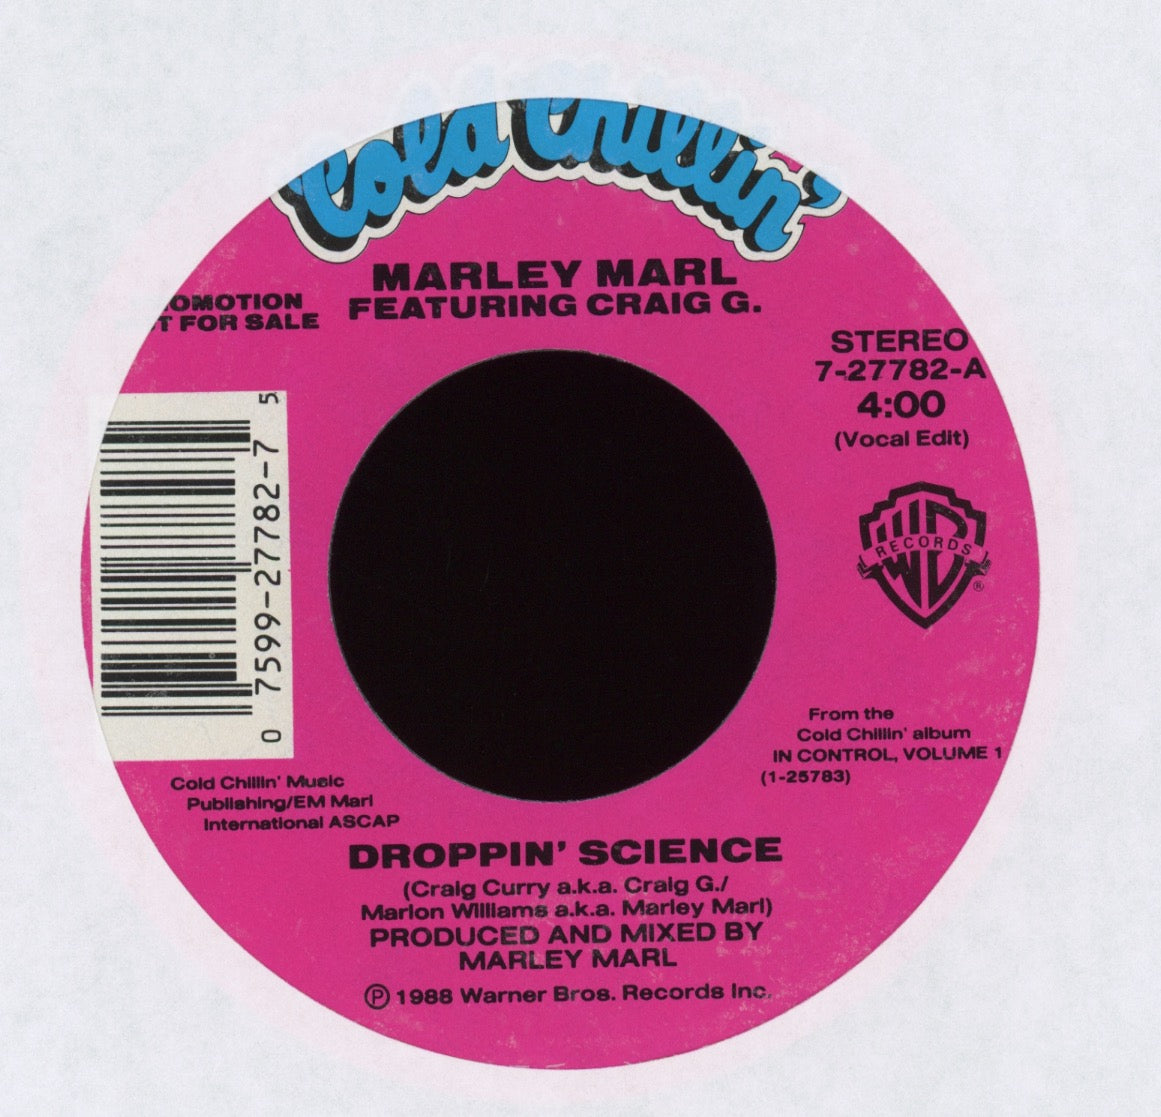 Marley Marl - Droppin' Science on Cold Chillin' Promo